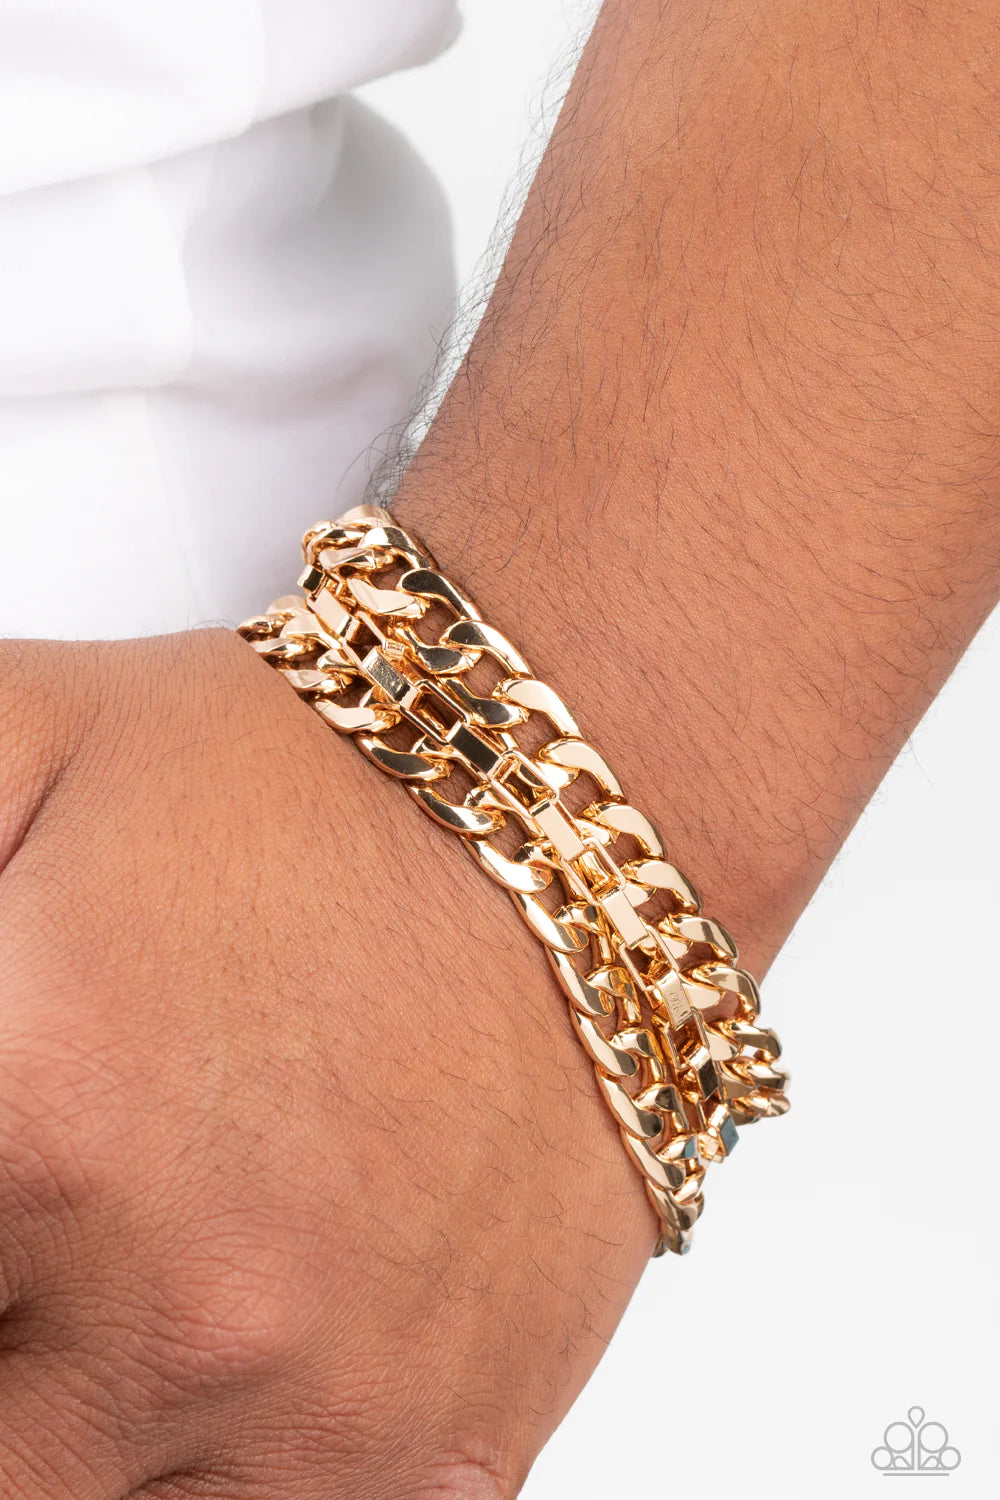 Paparazzi Accessories Heavy Duty - Gold Glistening gold curb and box chains wrap around the wrist for a grungy, industrial look. Features an adjustable clasp closure. Sold as one individual bracelet. Jewelry